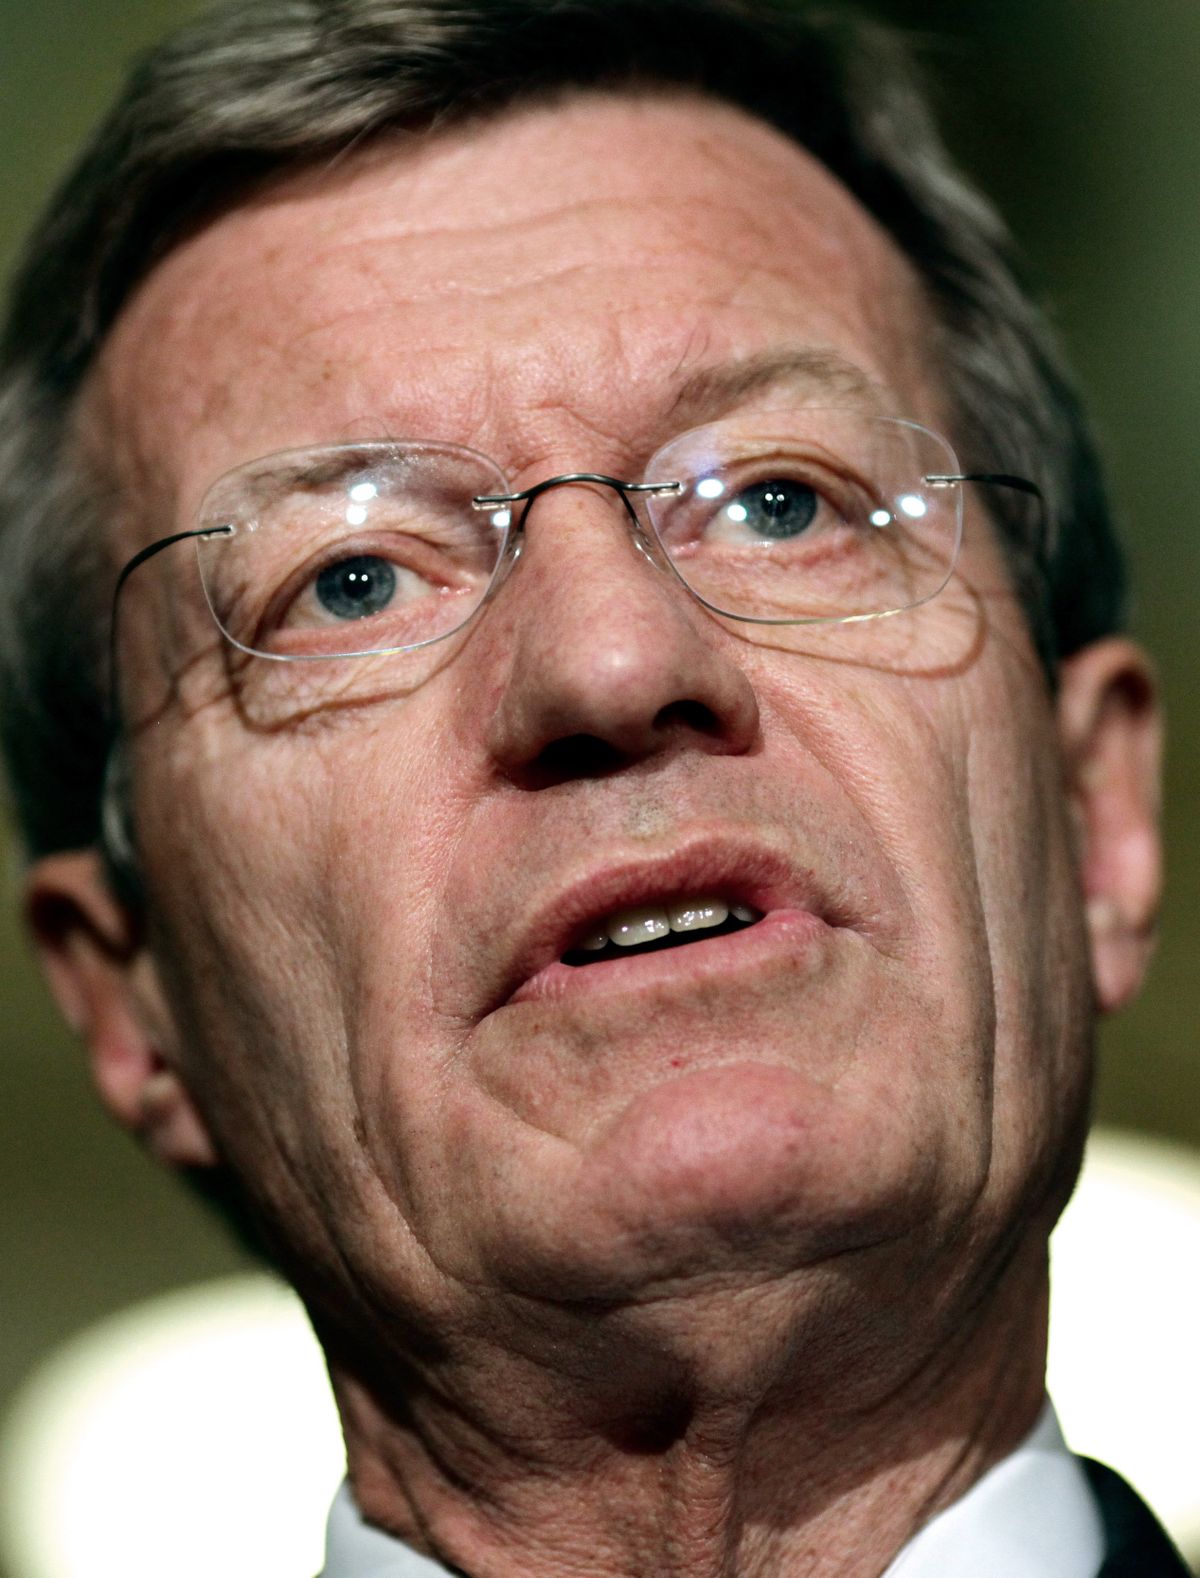 Max Baucus On taxing health care benefits: “That was discussed. It’s on the table.” (The Spokesman-Review)